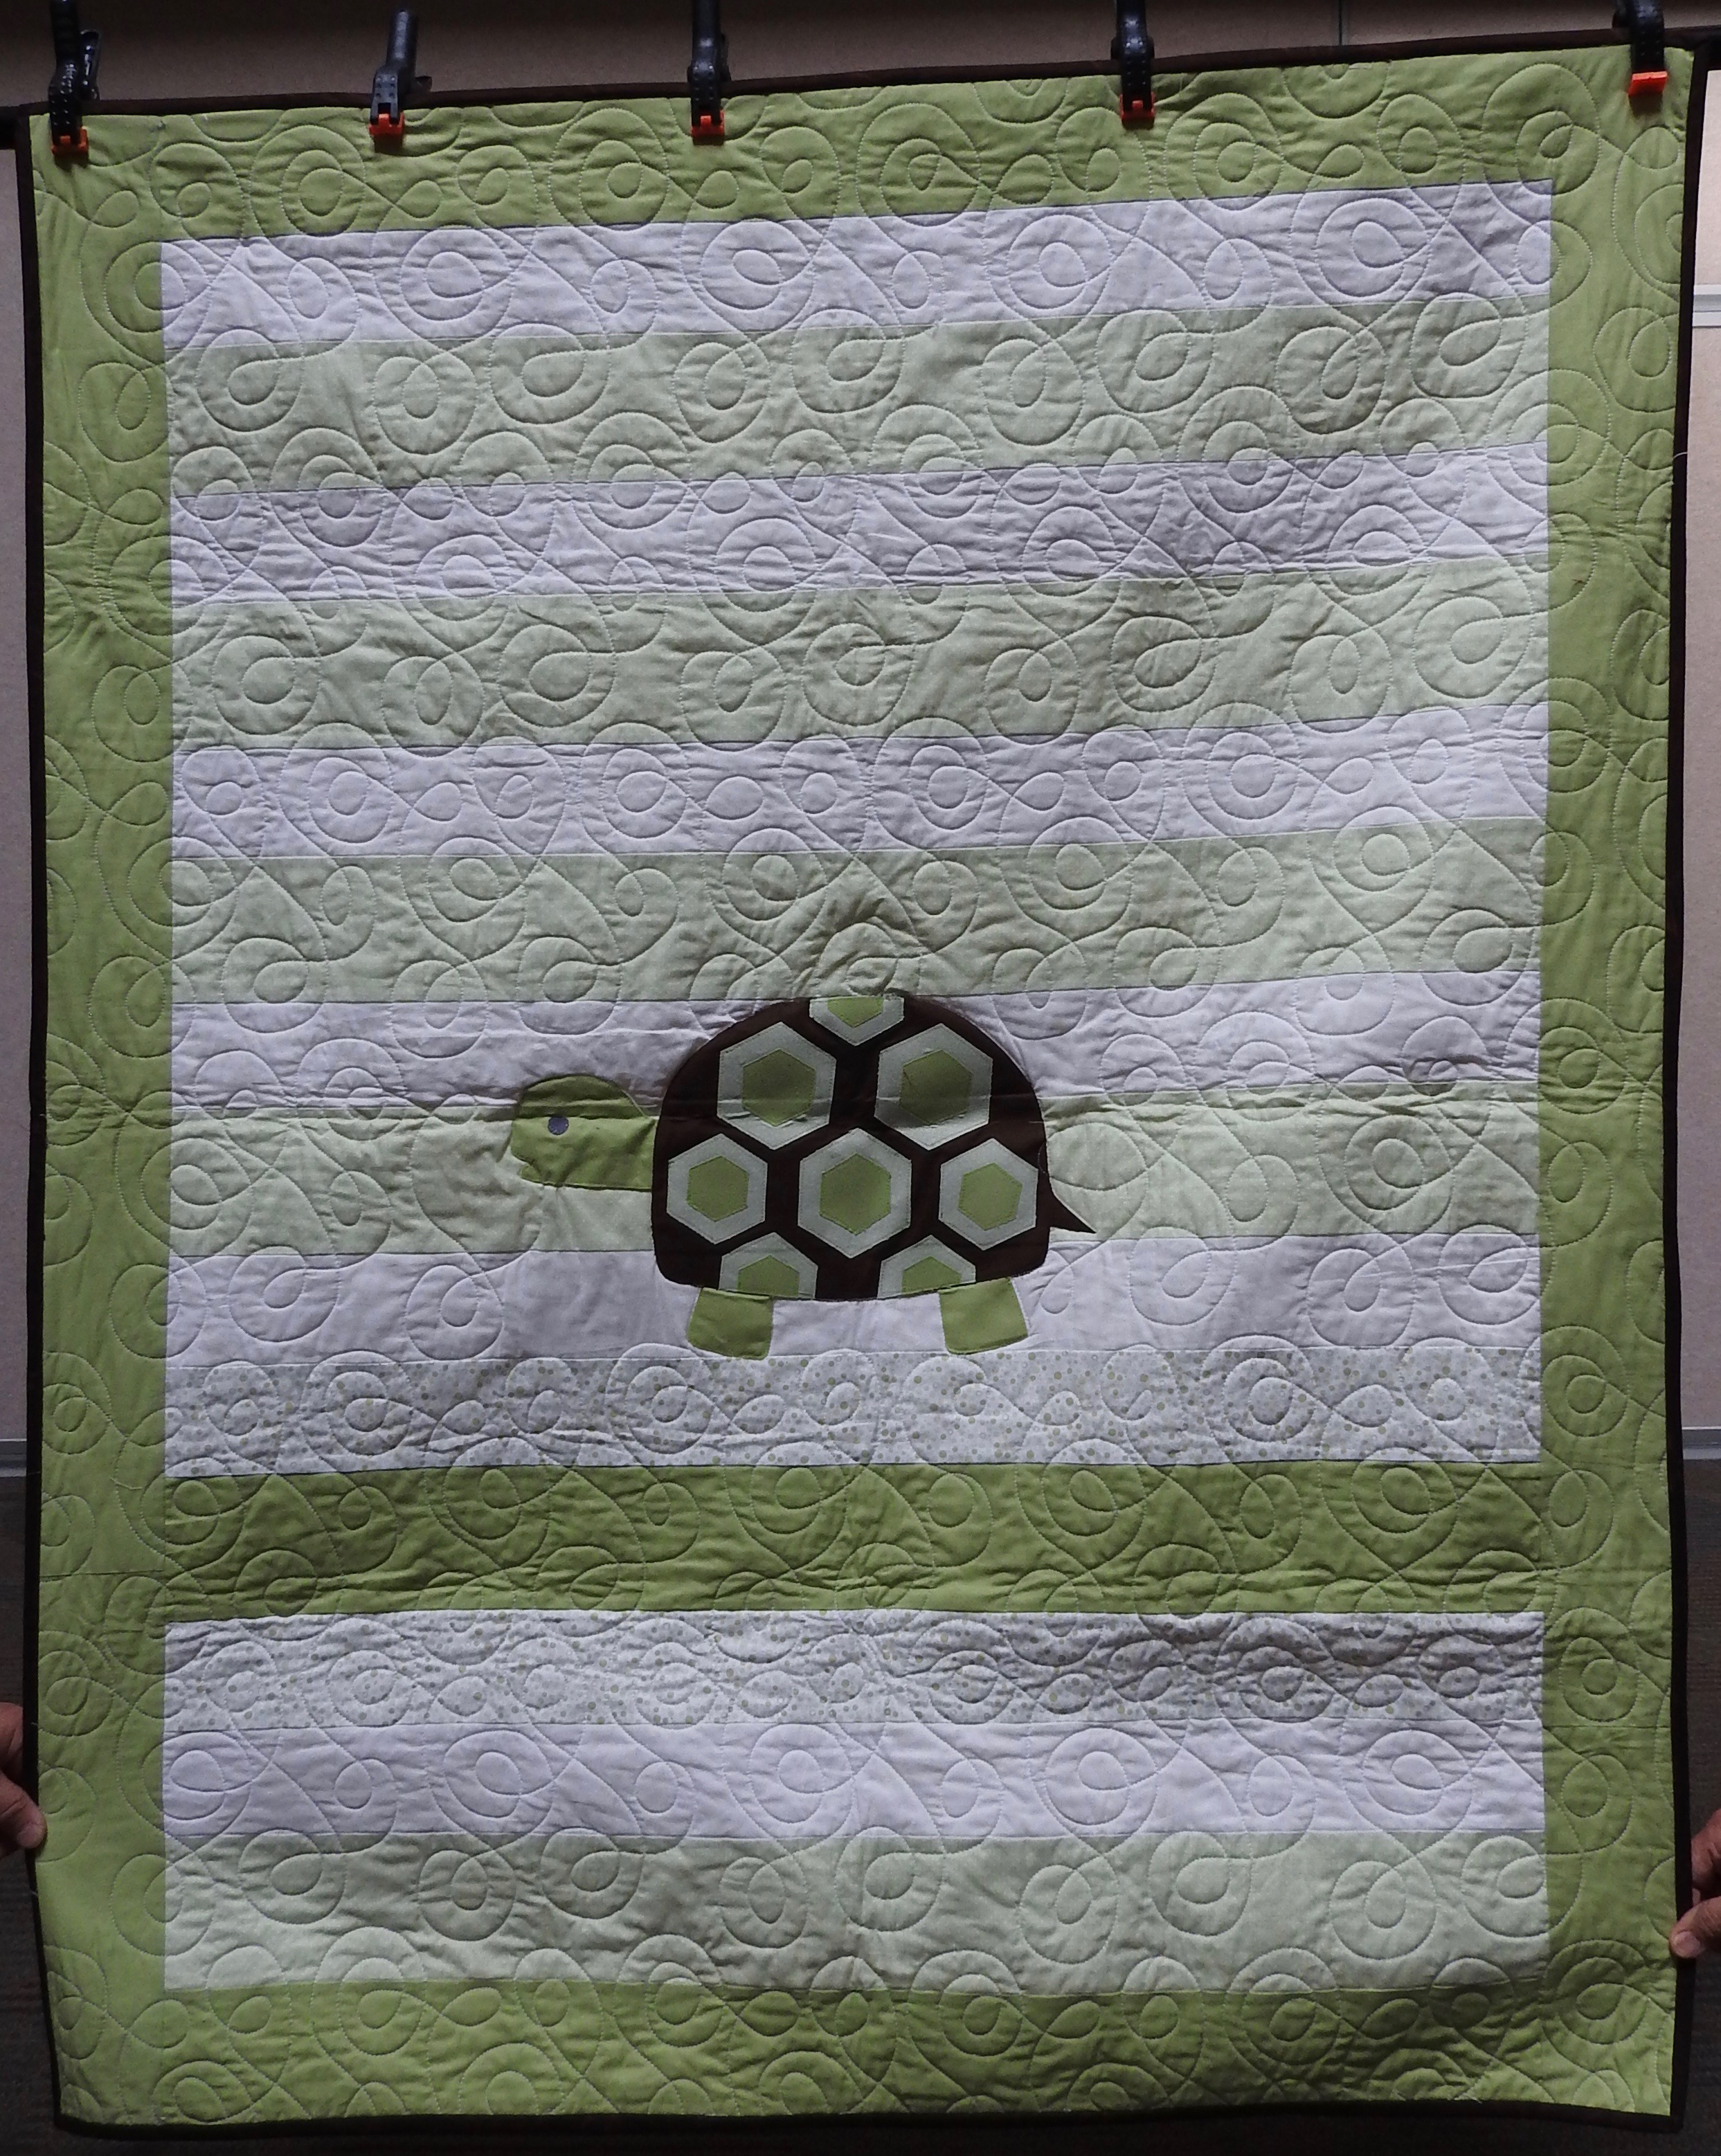 Ms. Turtle, Pieced, Machine Appliquéd, Edge to Edge Machine Quilted, donated anonymously, 44 x 54”